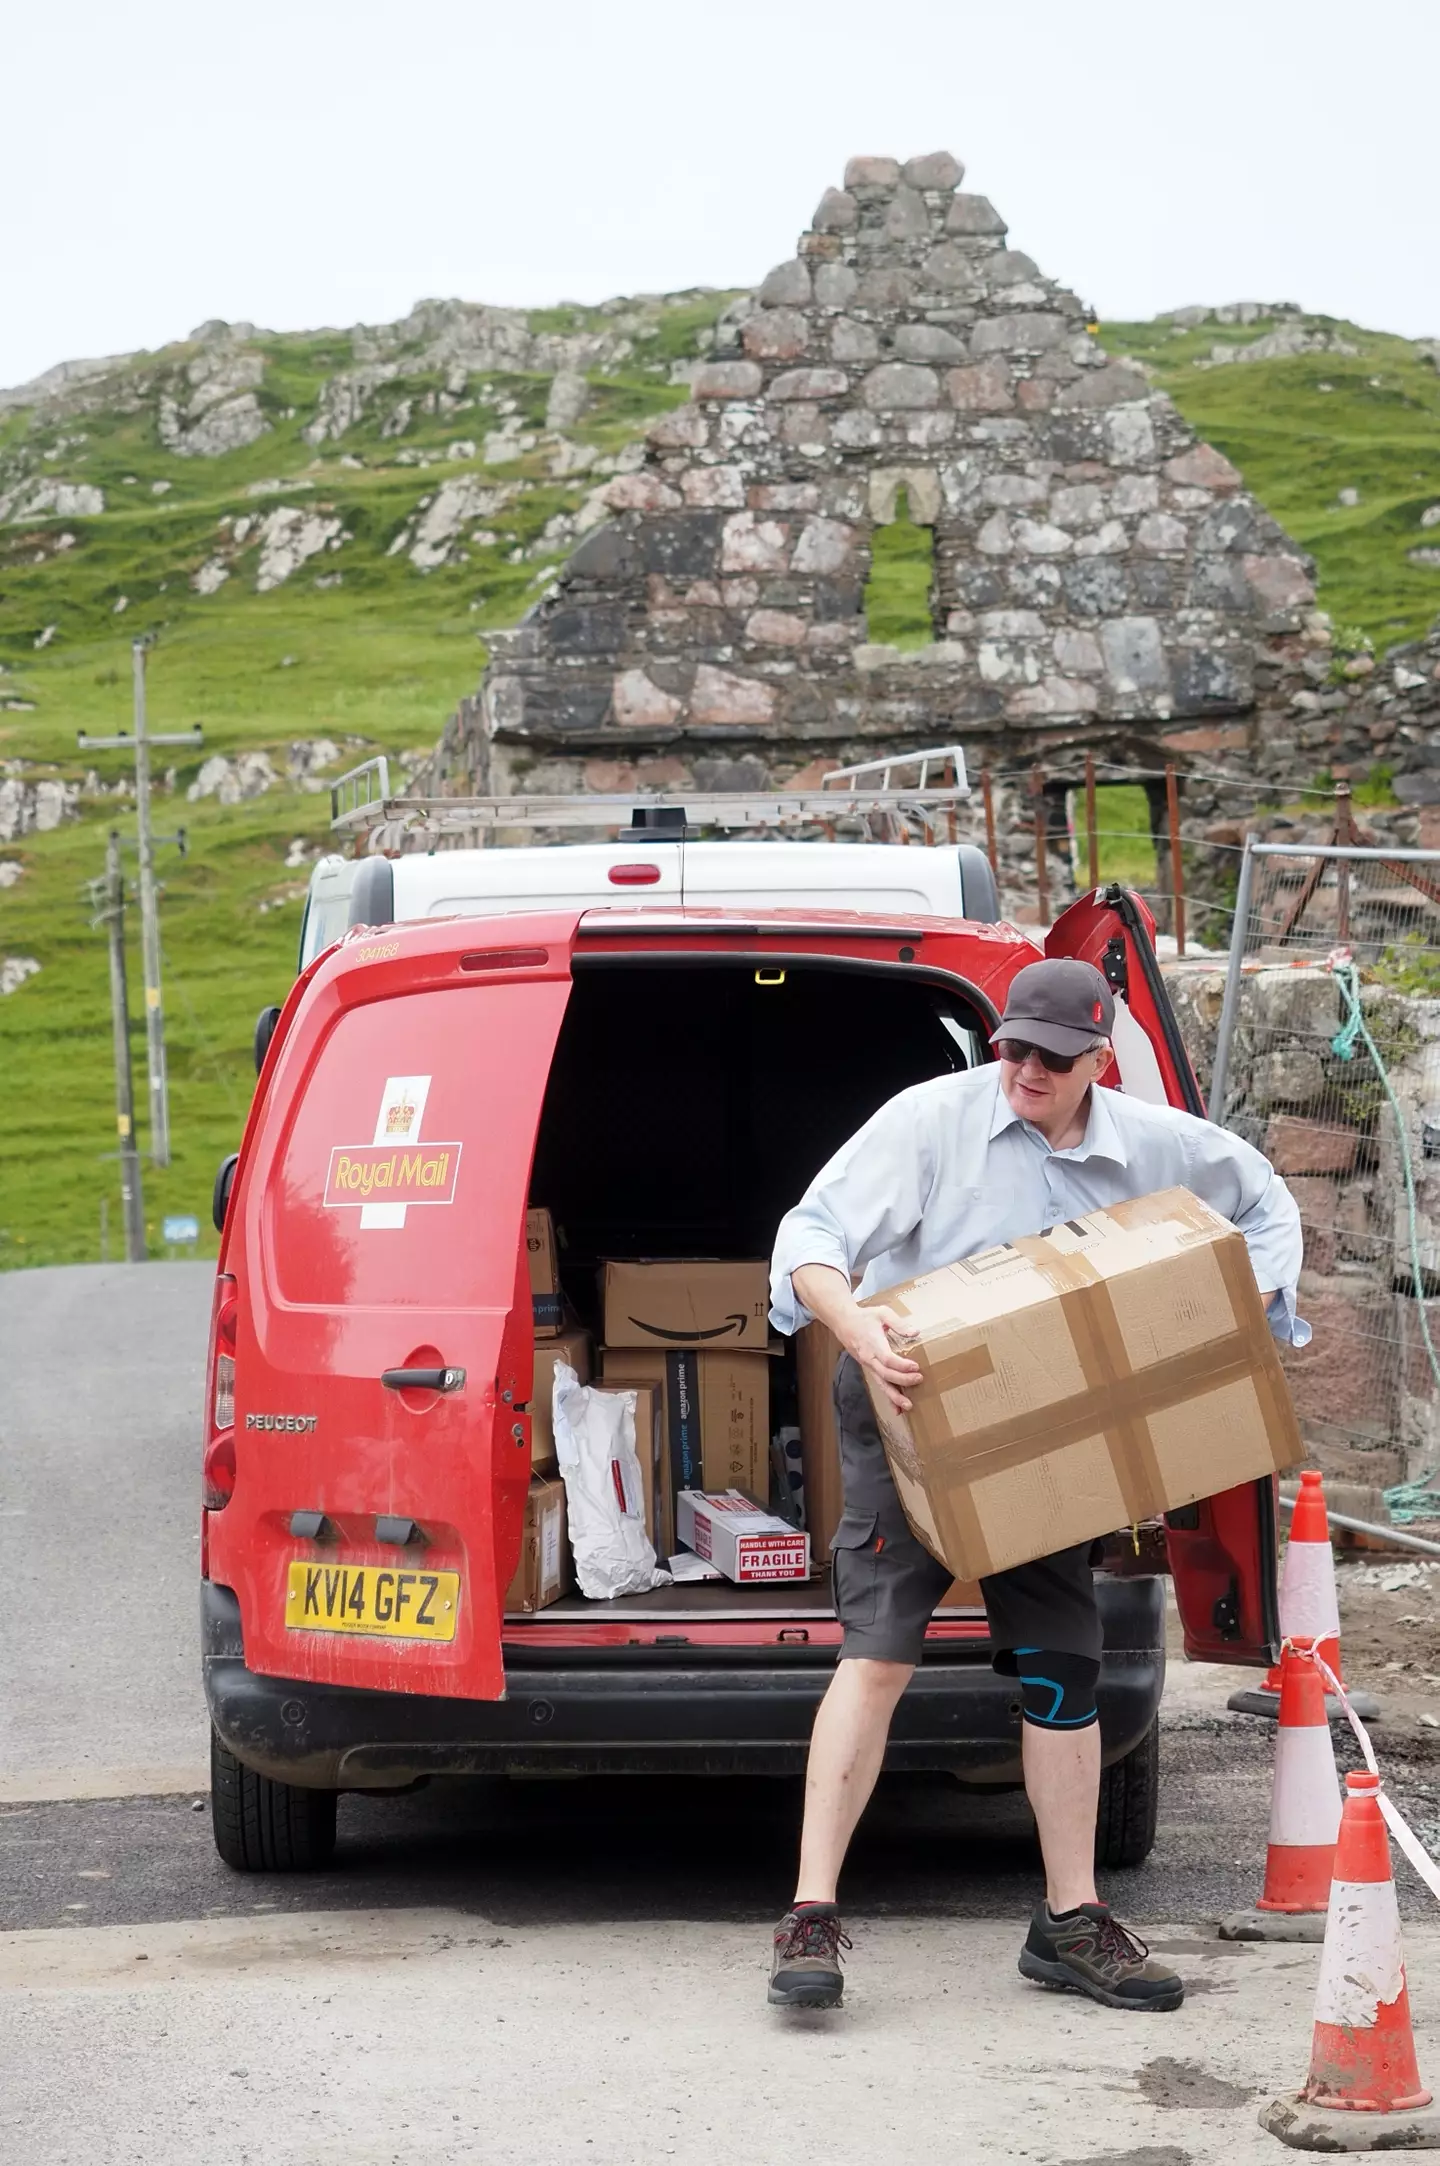 Many posties are known to wear shorts all year round.